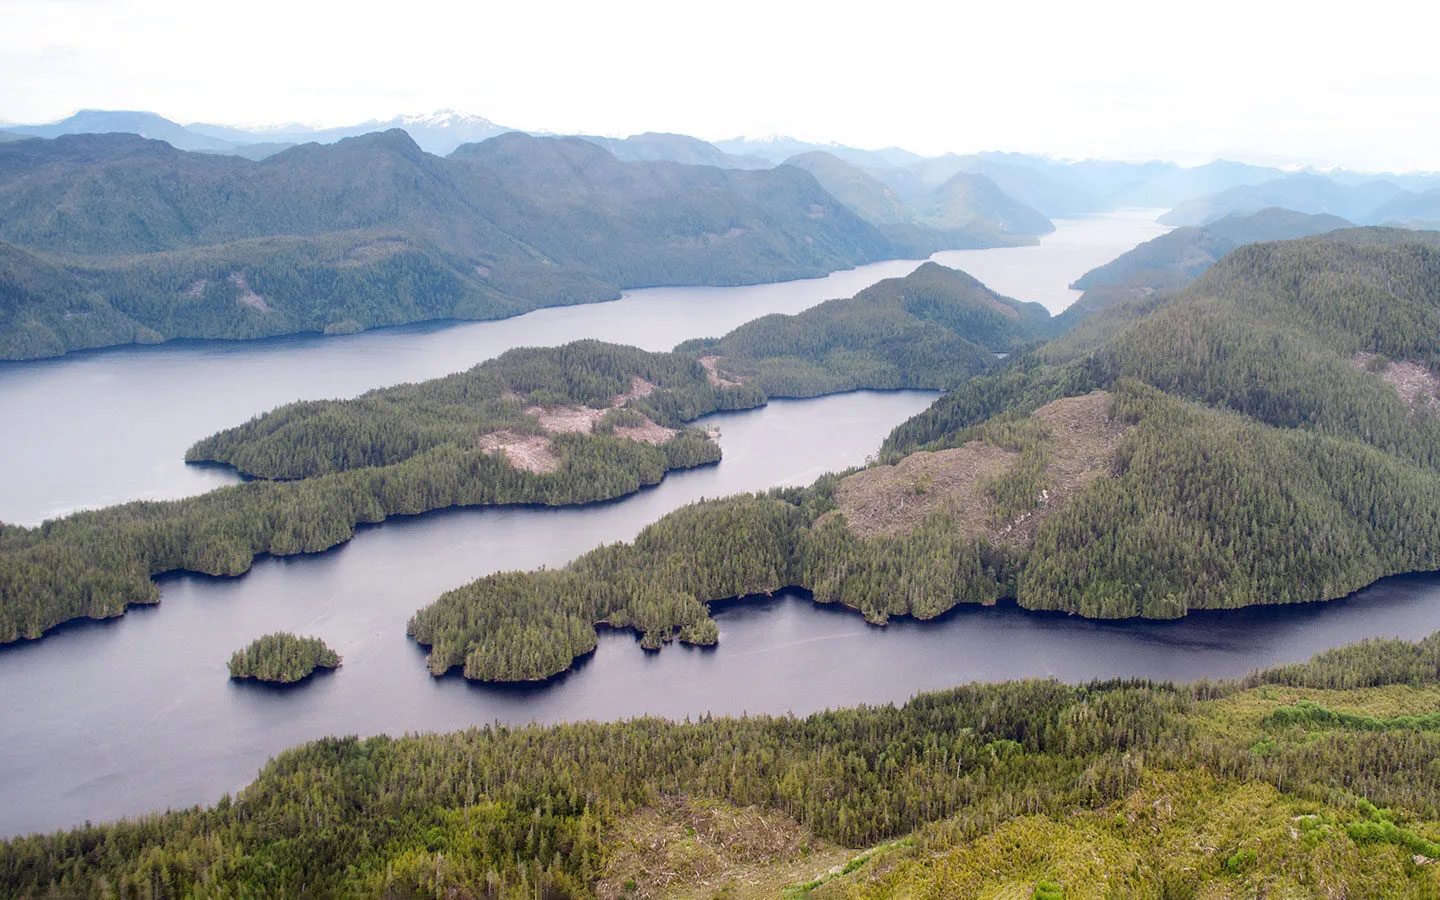 Views of the Great Bear Rainforest from a float plane